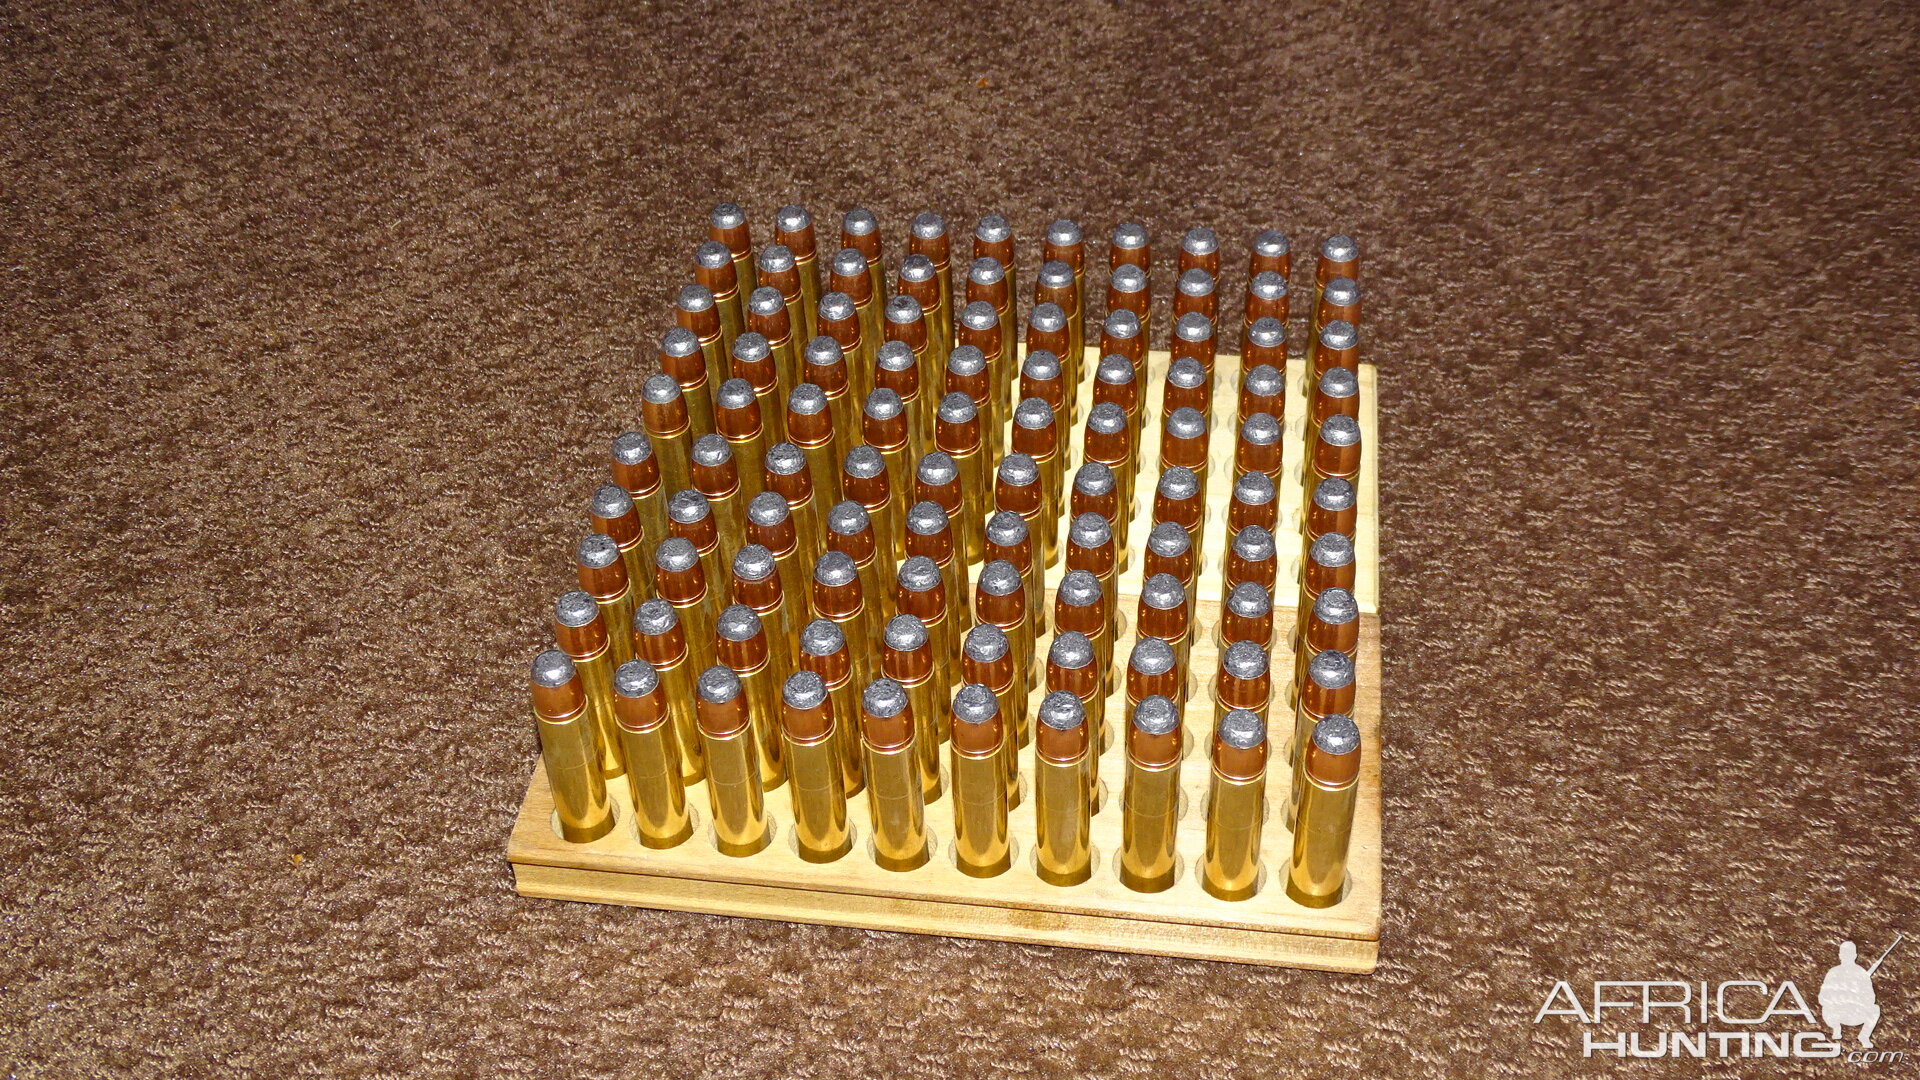 100 rounds 400 gr Speer flat nose soft point